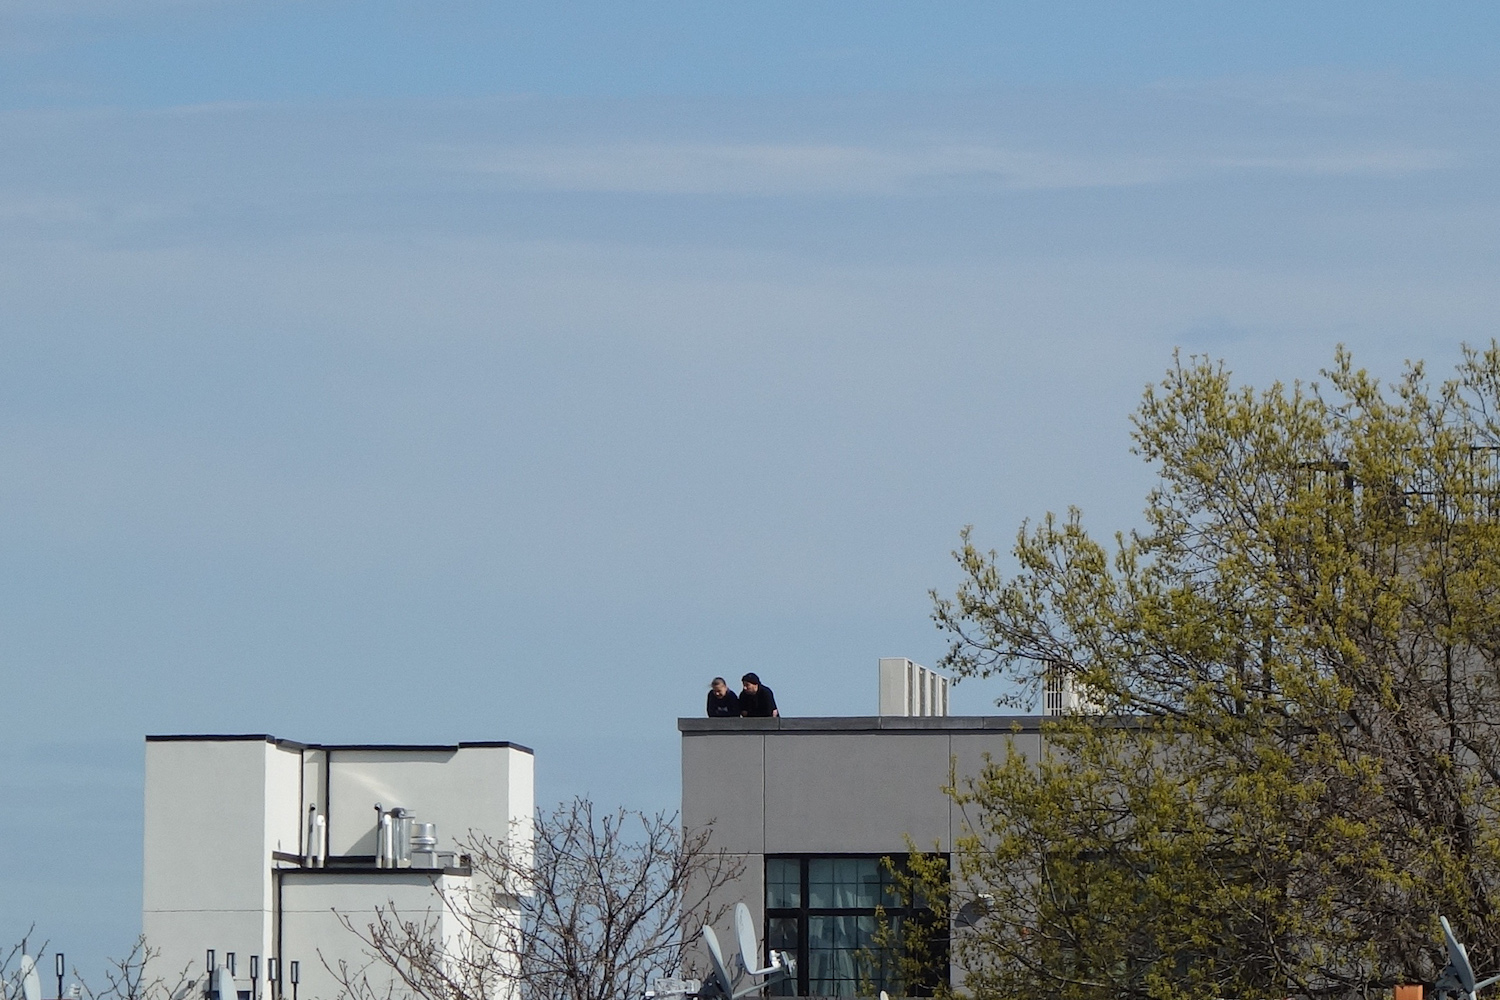 photo of people on rooftop talking on cellphones